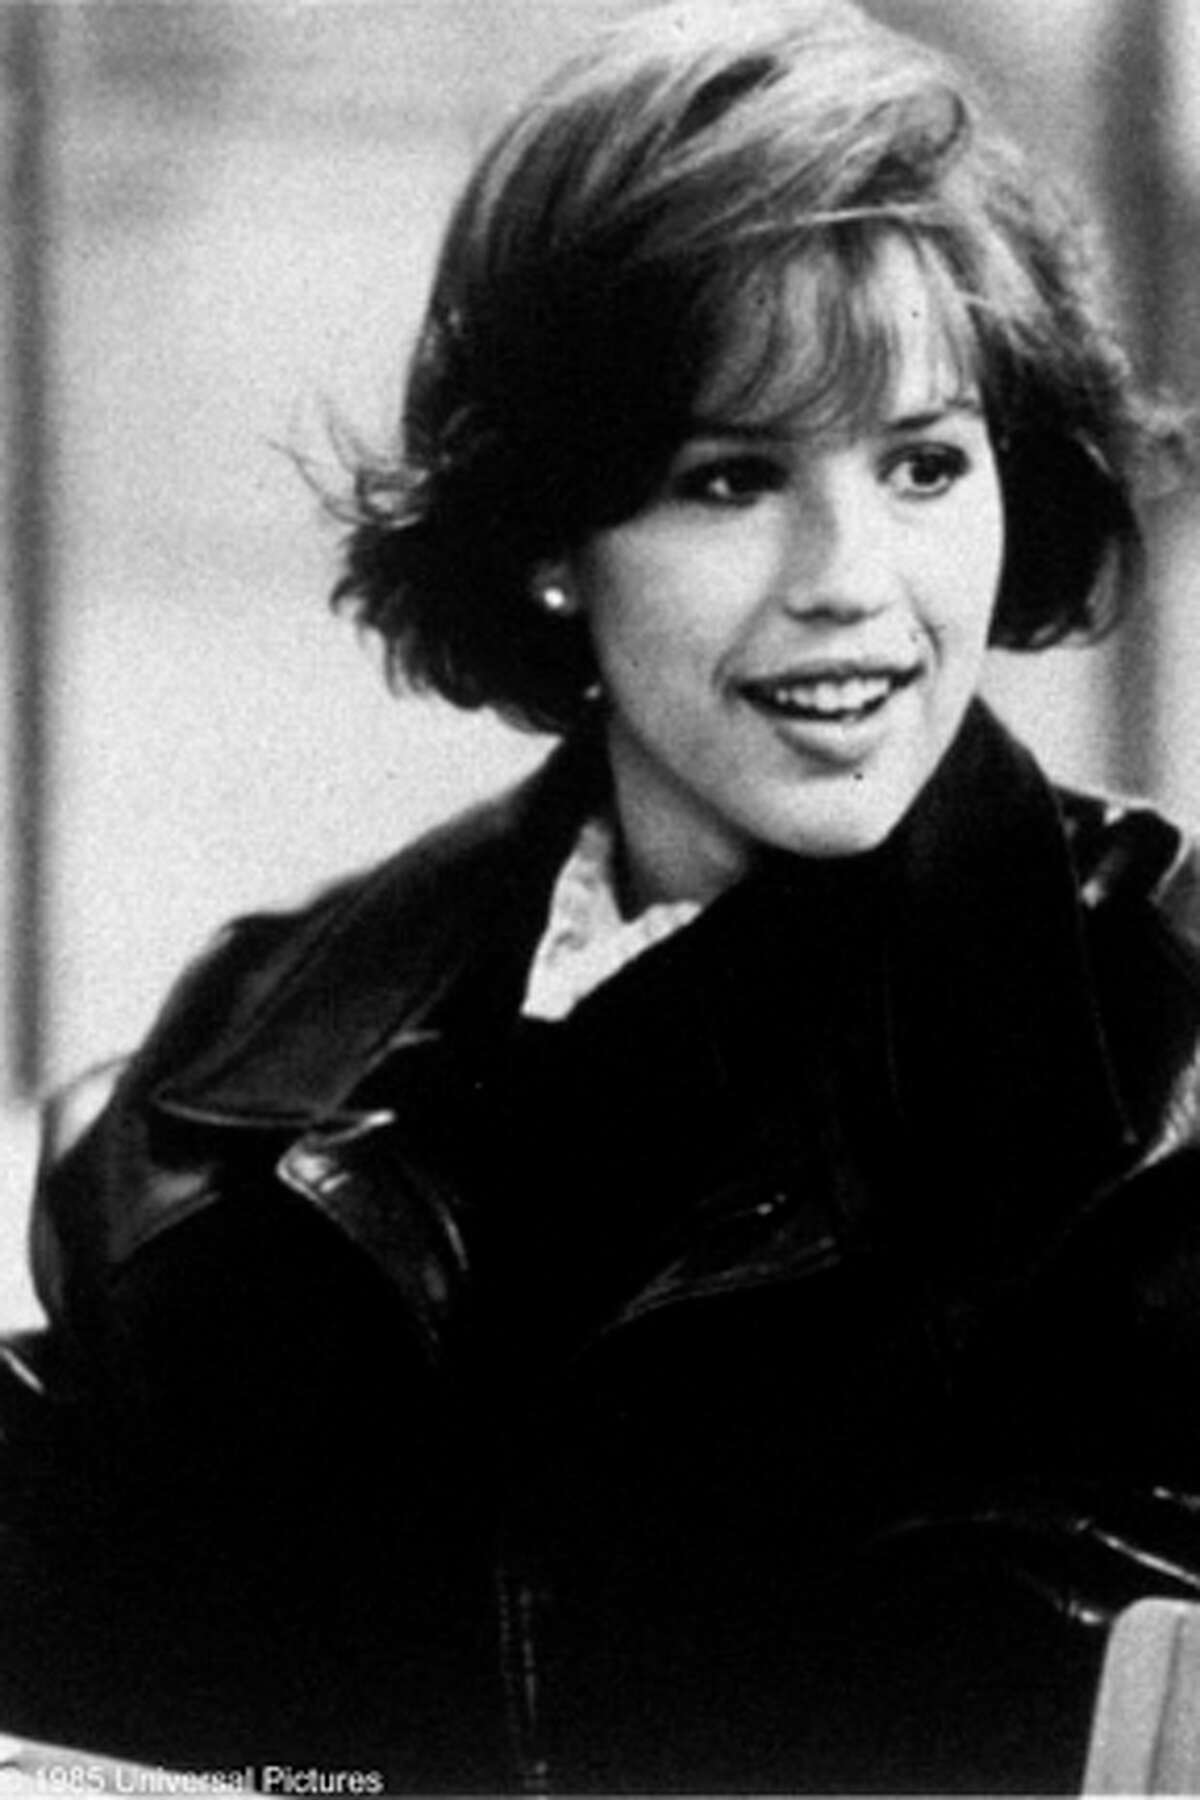 Molly Ringwald as Claire Standish, a very rich and very popular beauty who is much to sophisticated for her age in "The Breakfast Club."